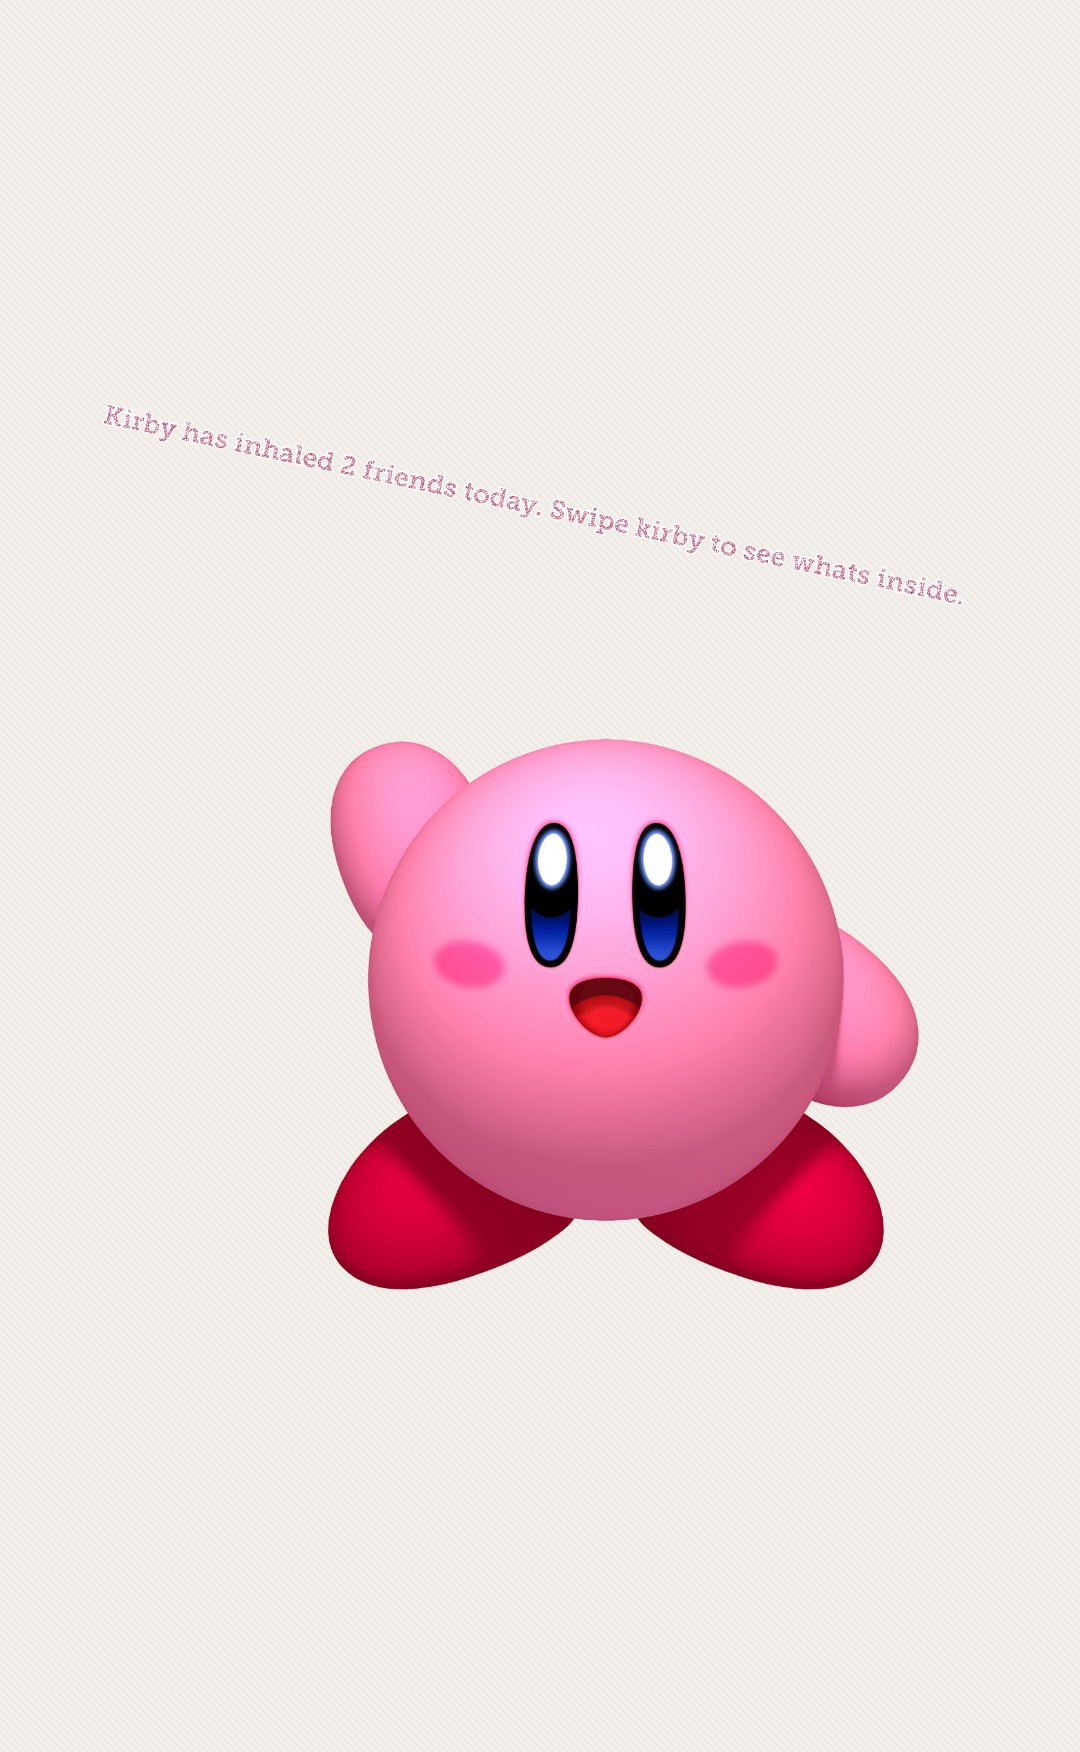 Kirby has inhaled 2 friends today. Swipe kirby to see whats inside.